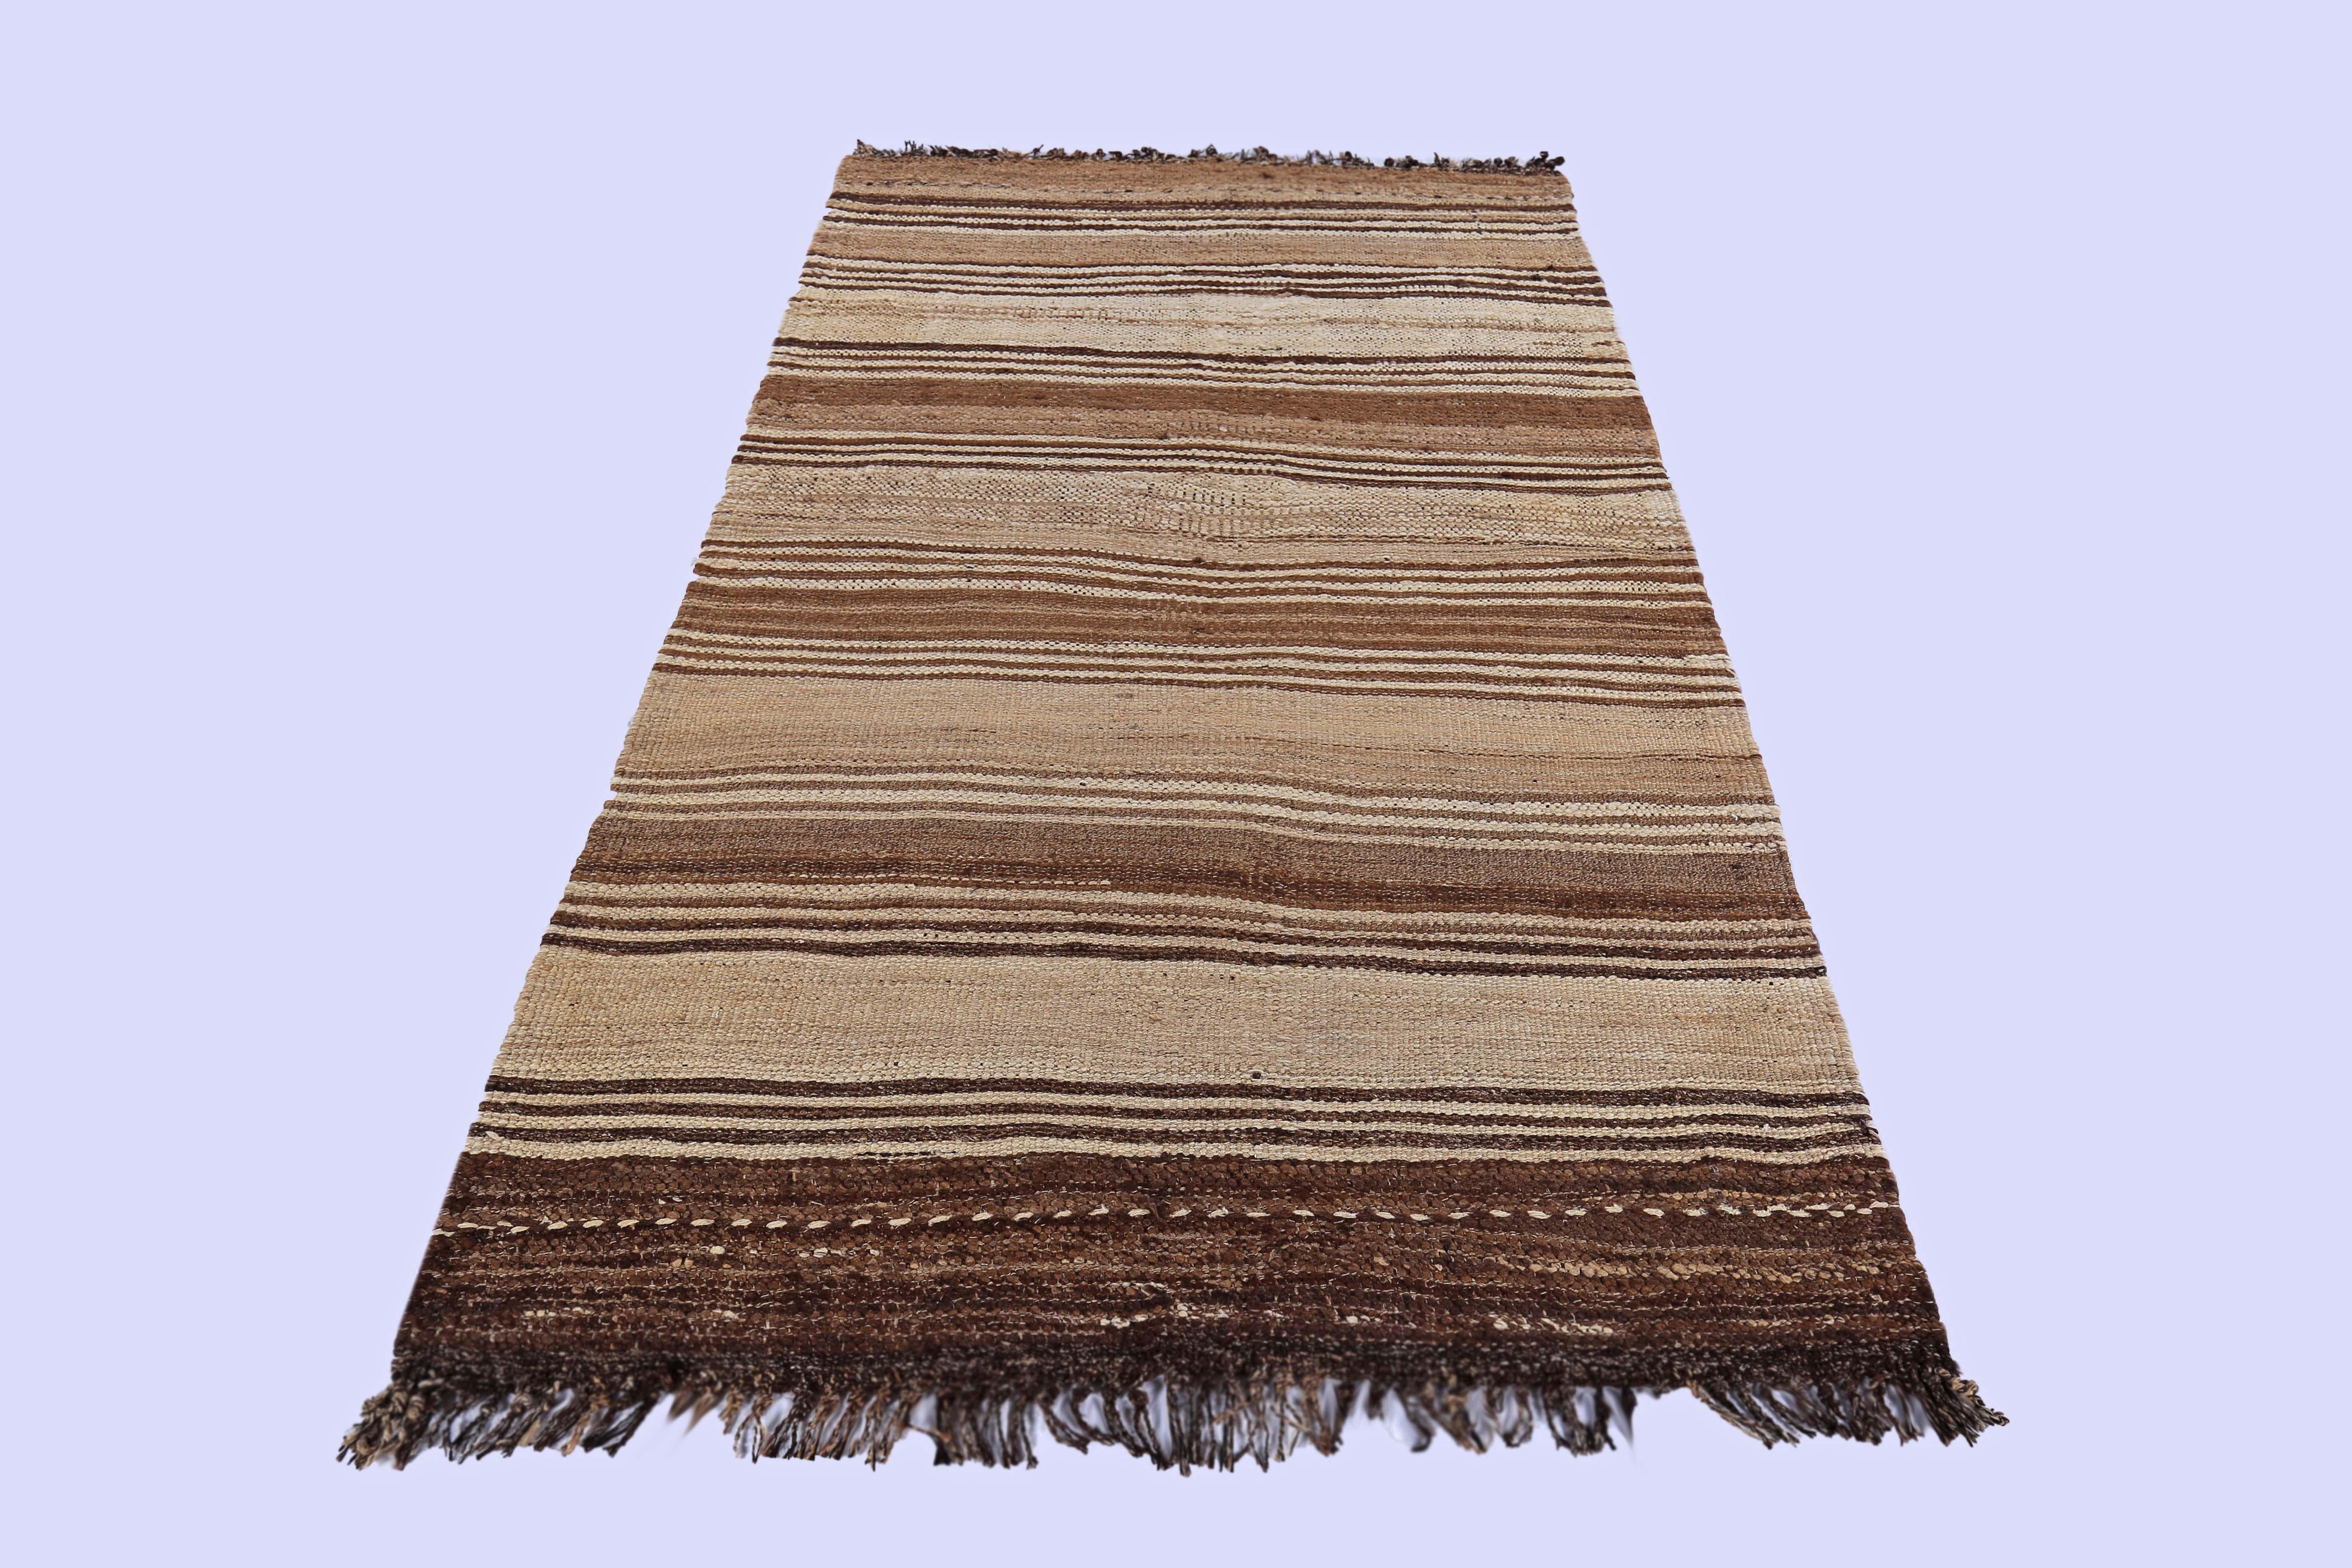 Contemporary Turkish rug handwoven from the finest sheep’s wool and colored with all-natural vegetable dyes that are safe for humans and pets. It’s a traditional Kilim flat-weave design featuring brown stripes on a beige field. It’s a stunning piece